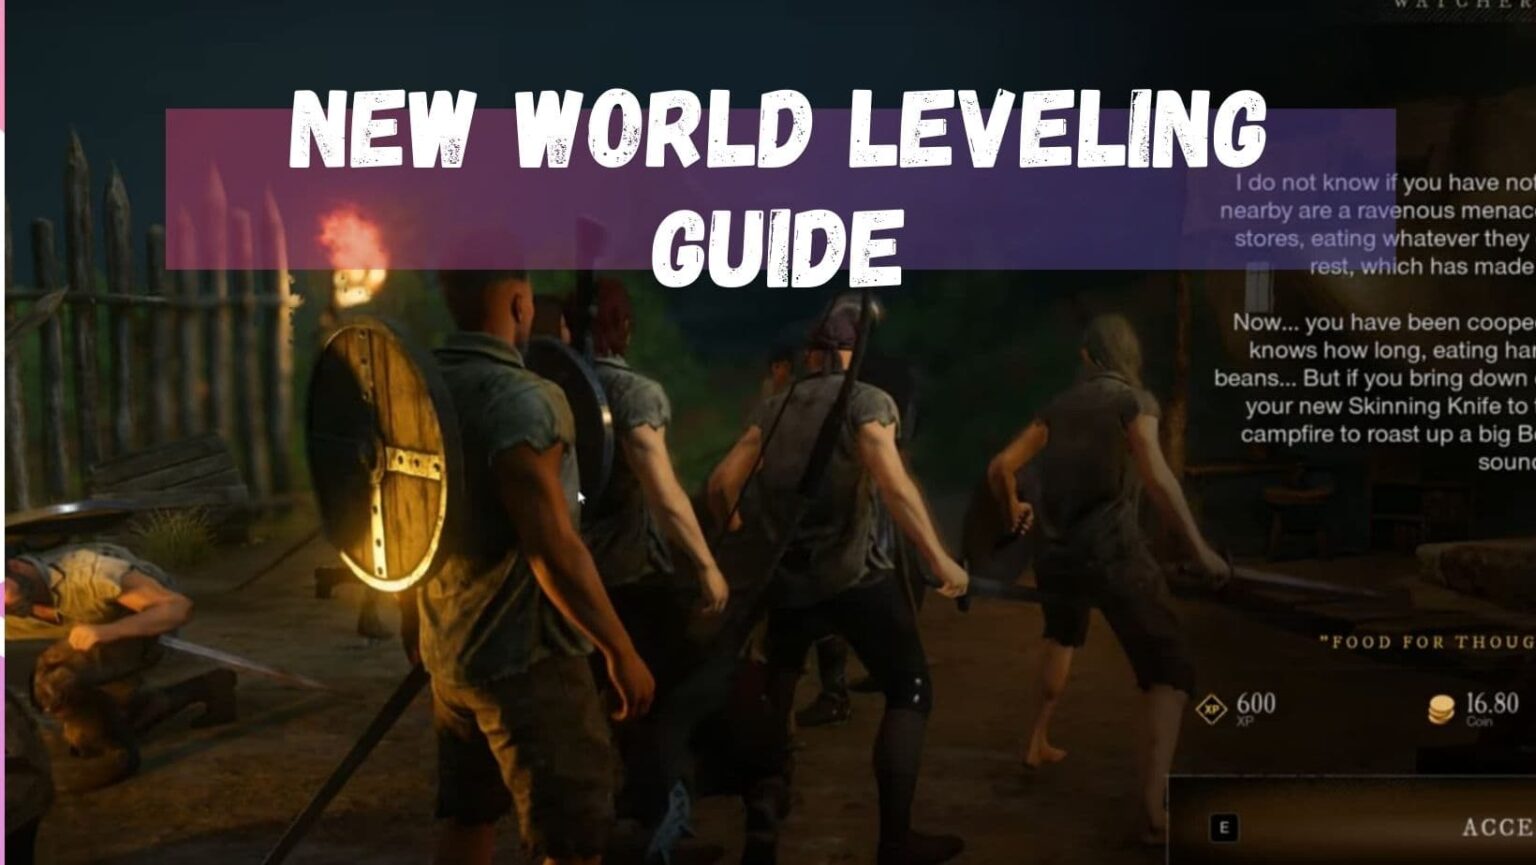 New World Leveling Guide Fastest way to Level up your charactor Ava's